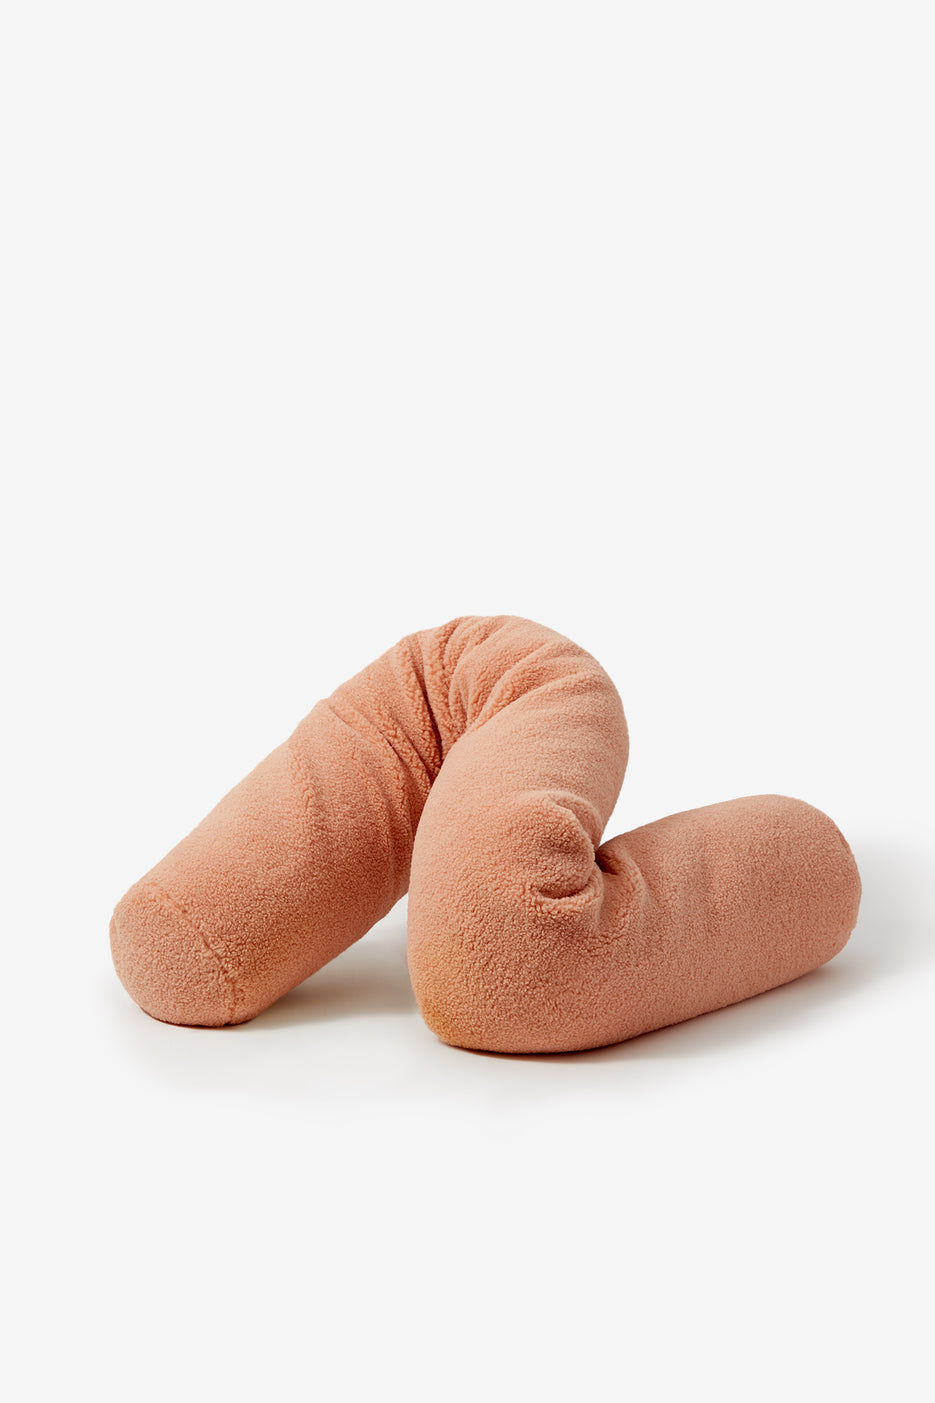 best travel pillow uk for side sleepers